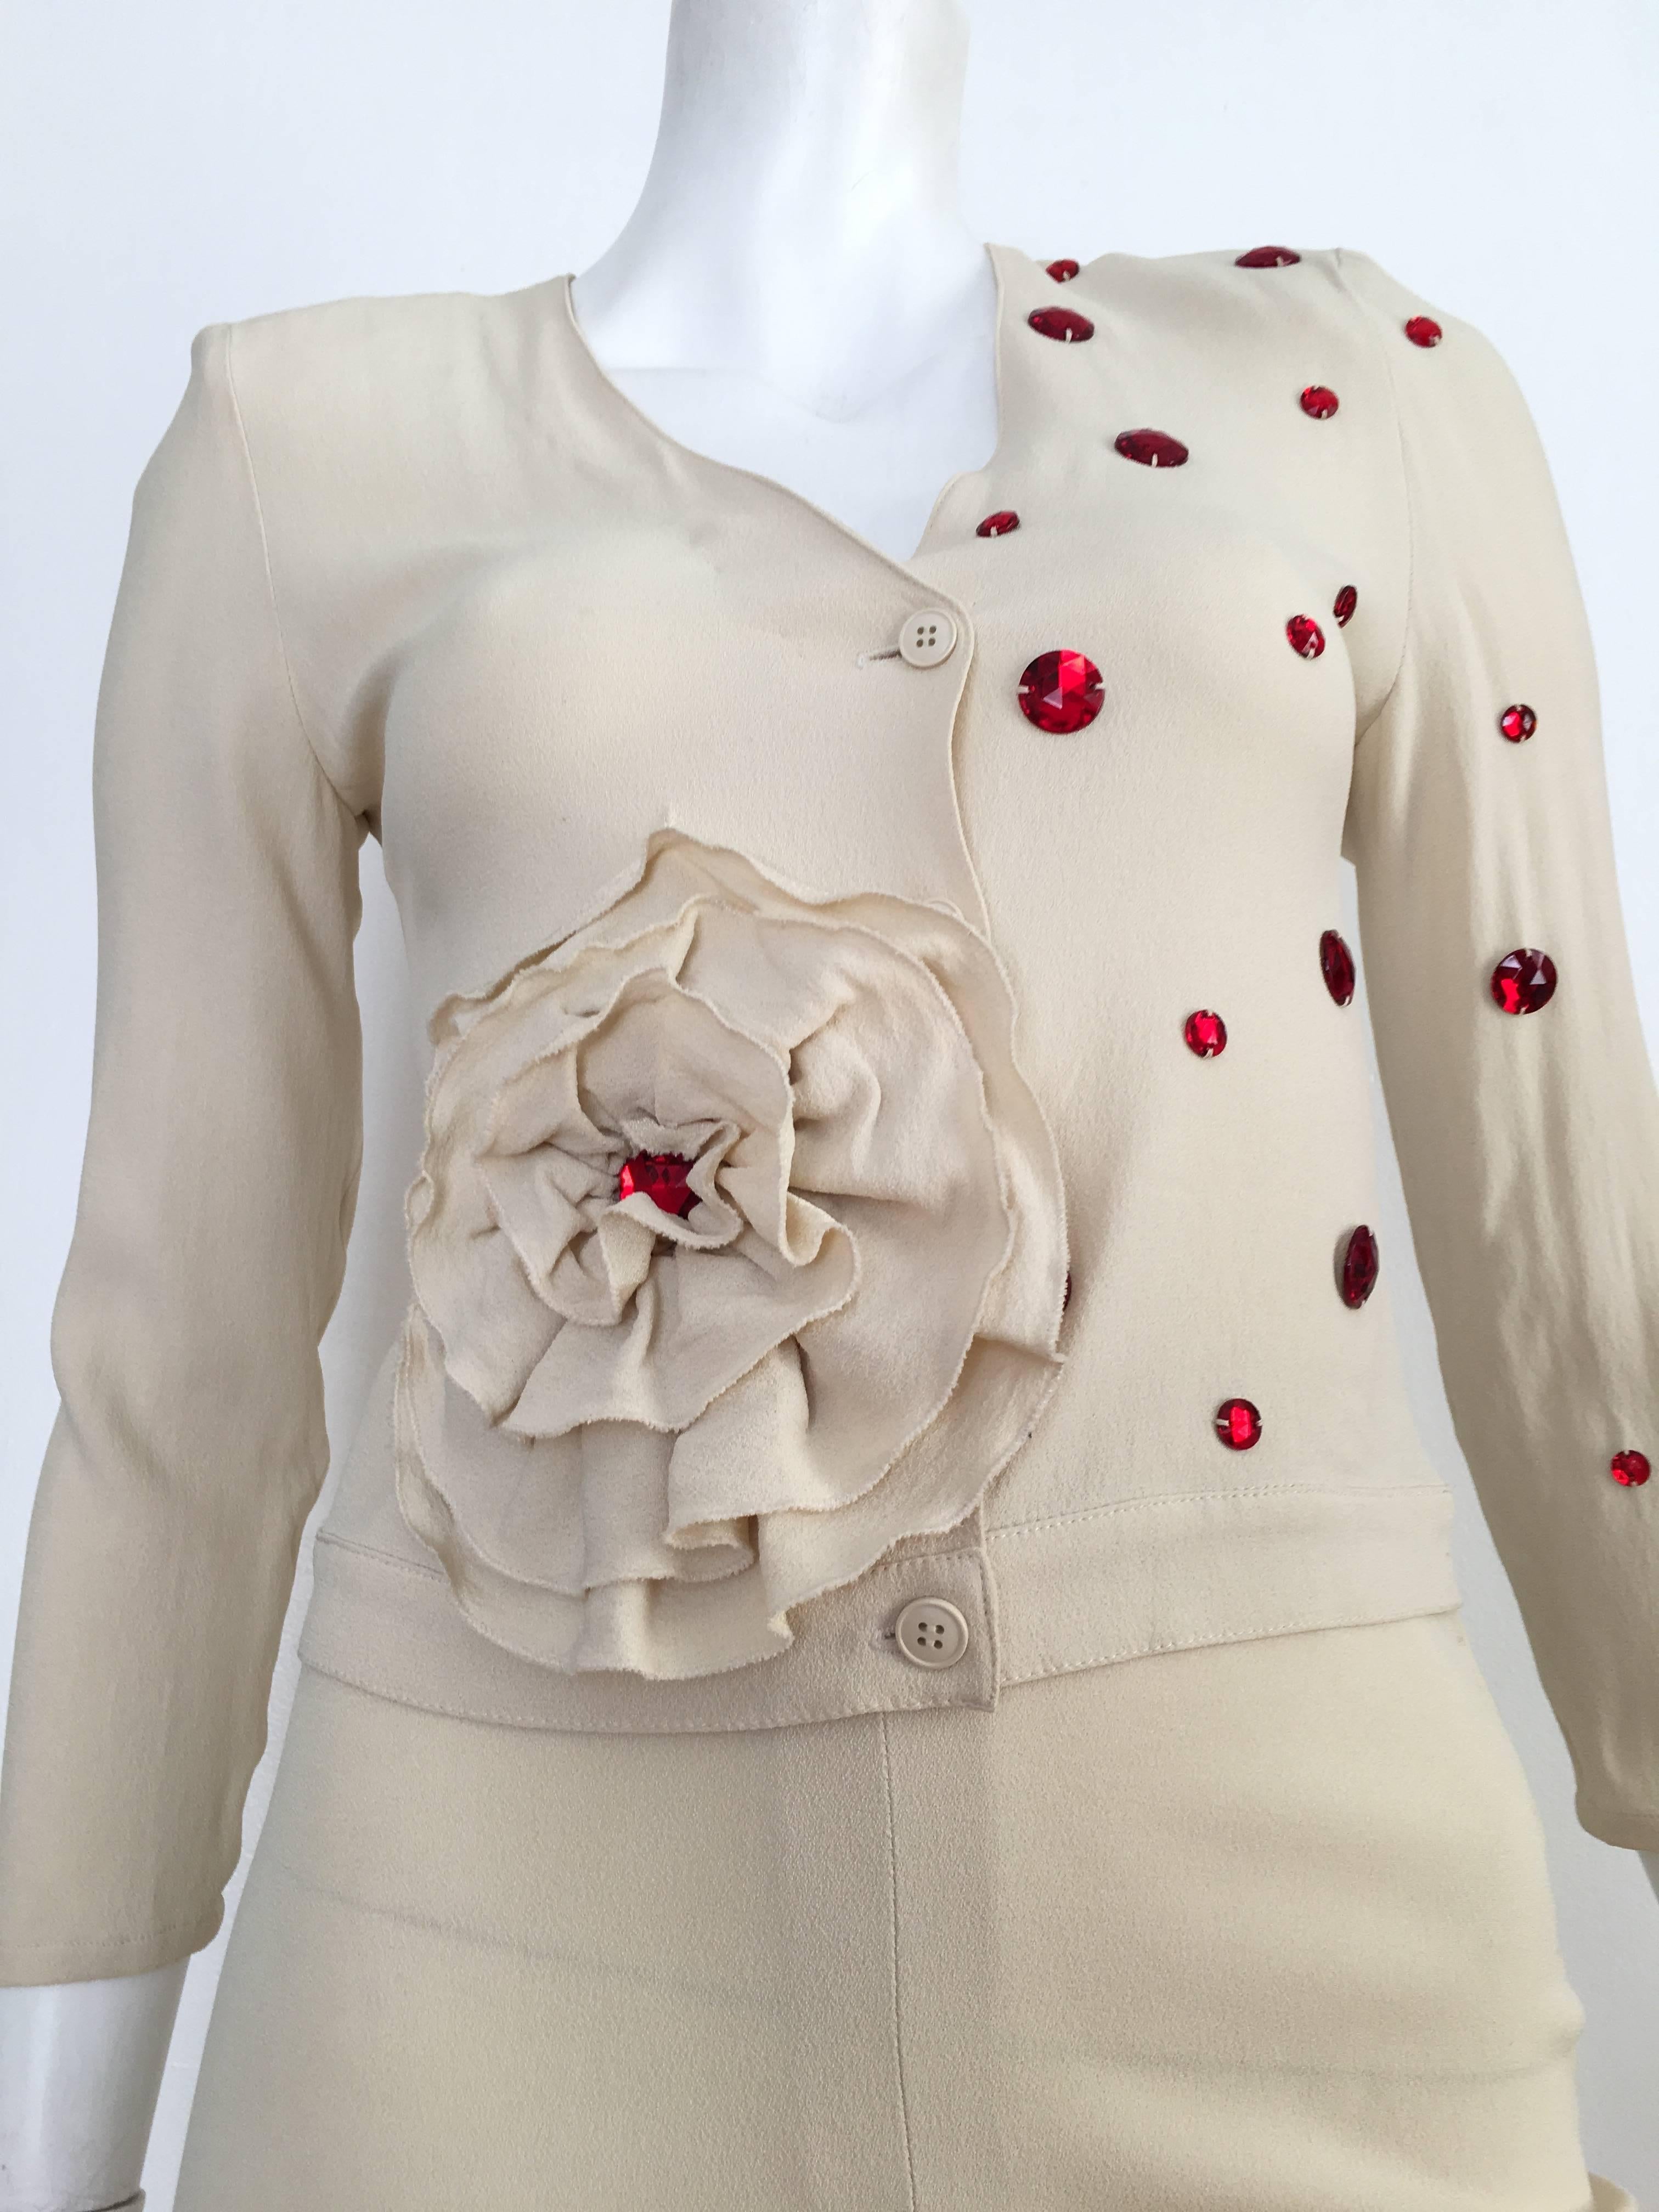 Sonia Rykiel 1980s cream jacket & skirt with red rhinestones is a size 4.  Ladies please grab your trusted tape measure so you can measure your bust, waist & hips to make certain this treasure will fit you the way Sonia wanted it to, may she